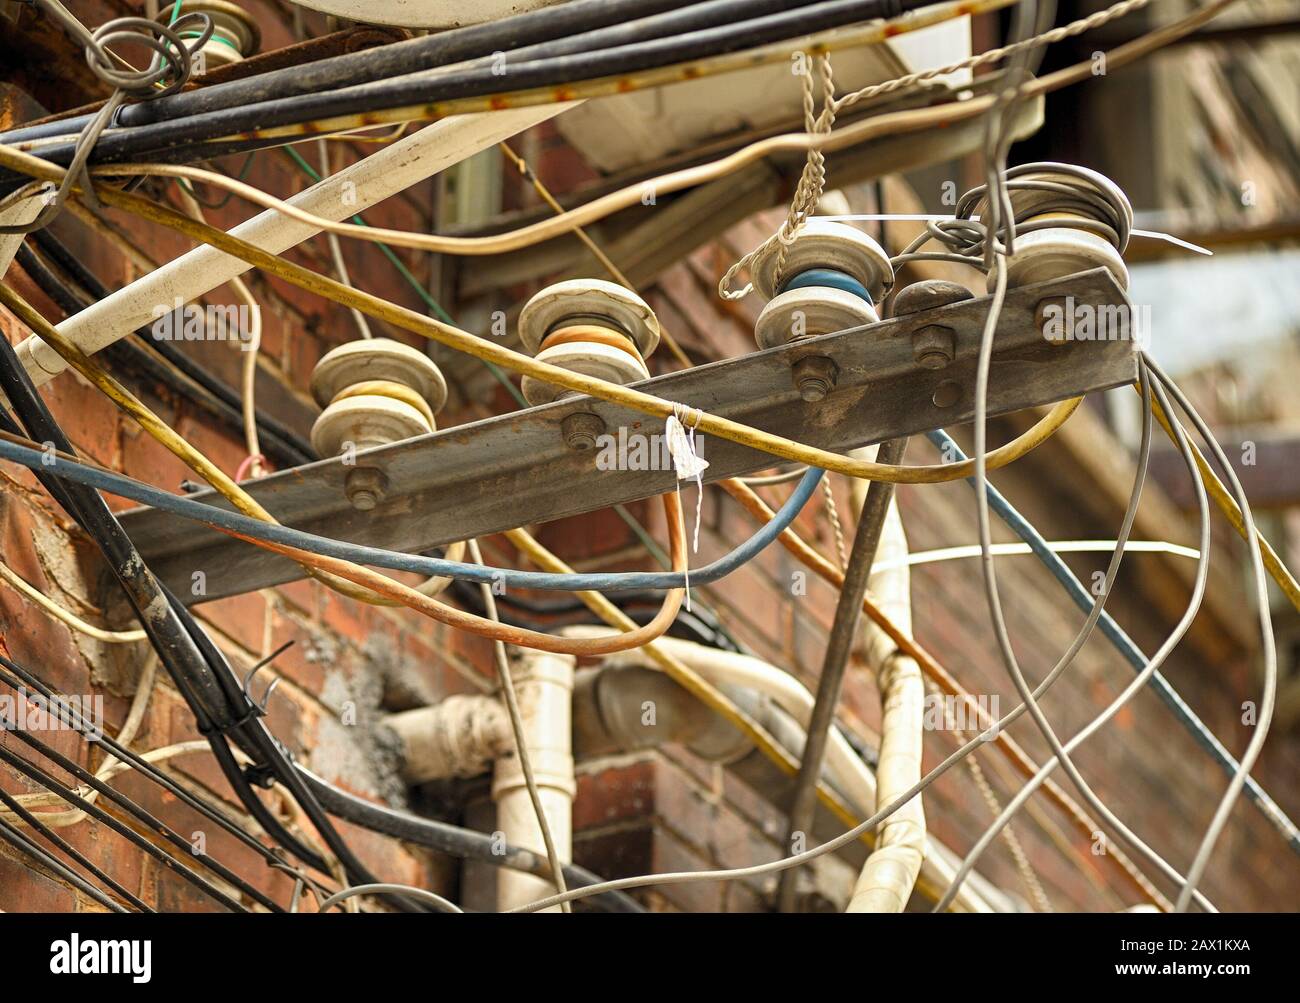 Obsolete electrical network, old wires fixed to brick building